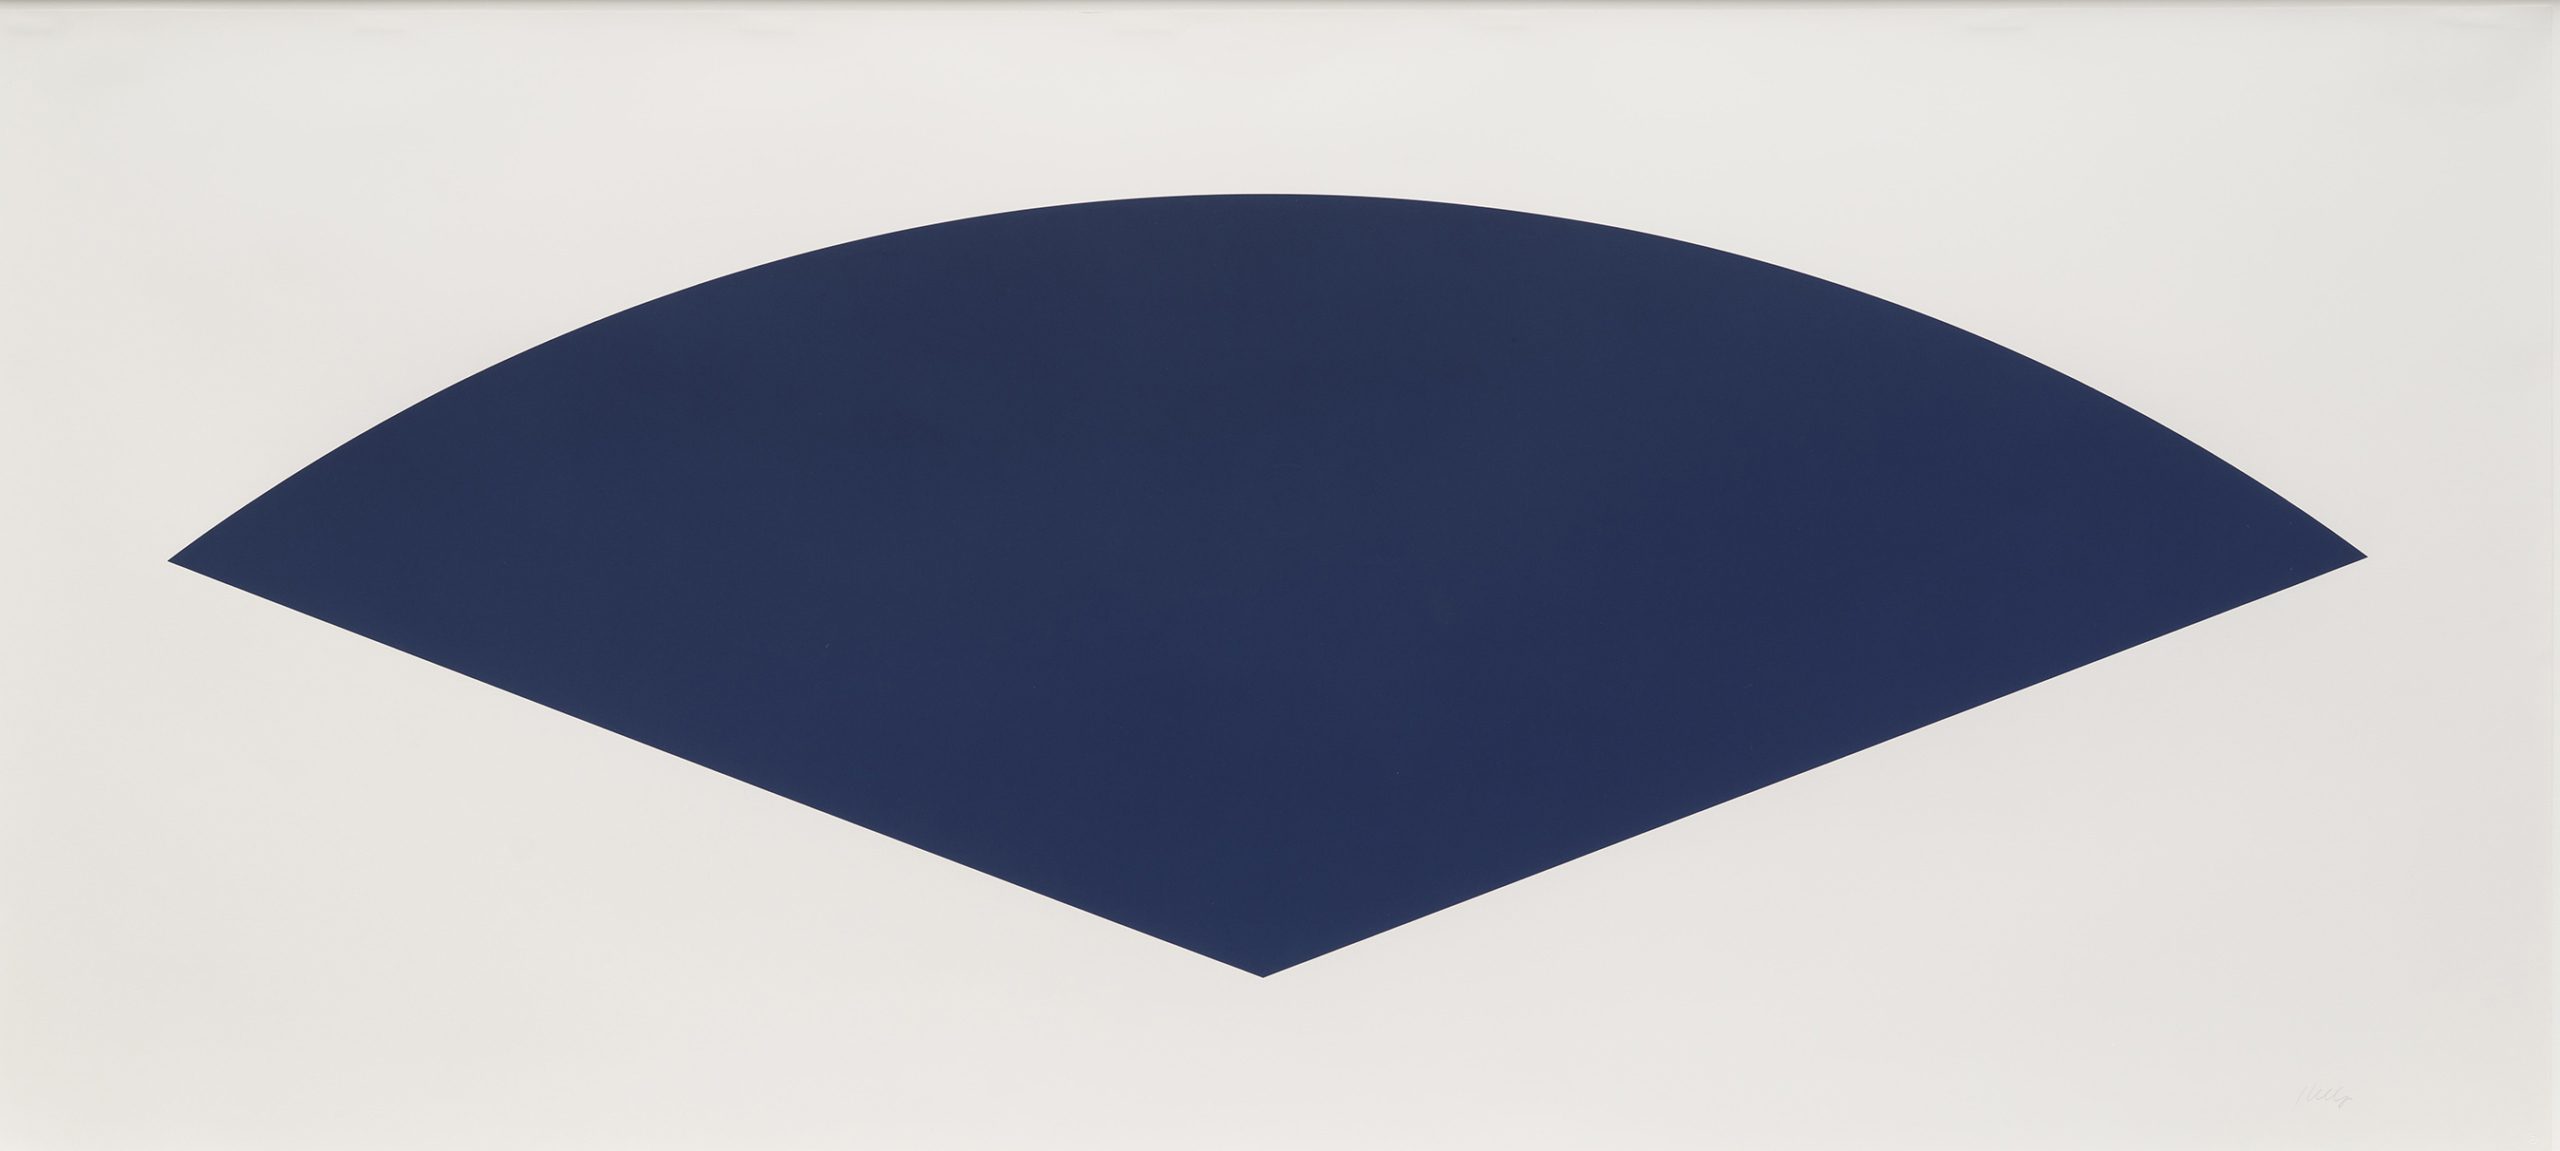 On View: Ellsworth Kelly - Blue Curve (State III)